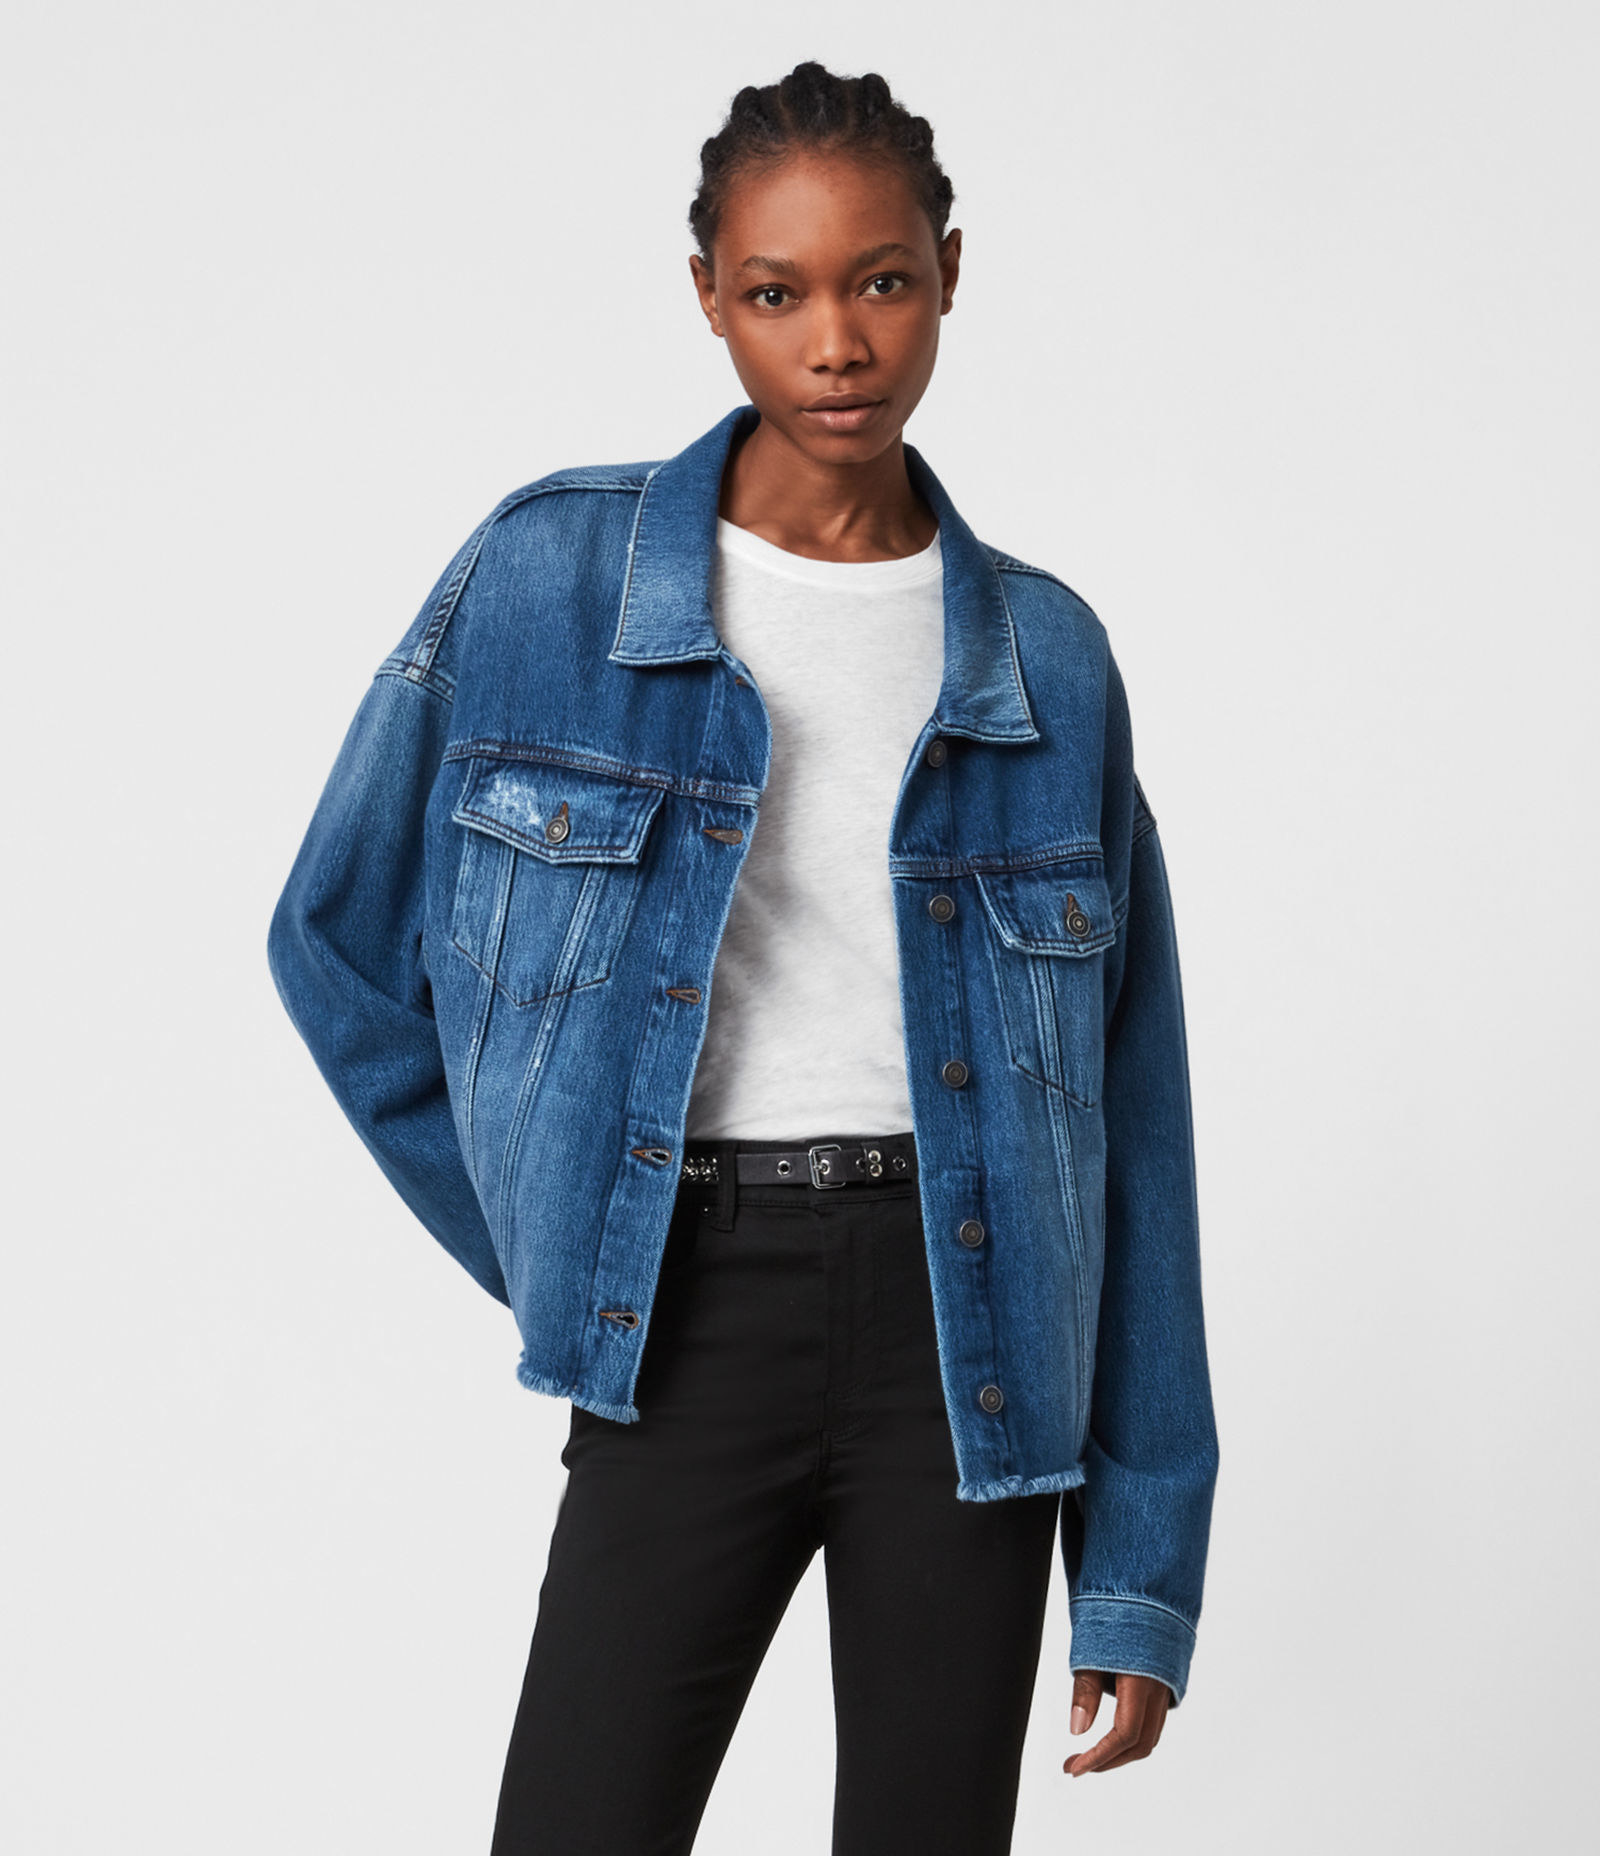 A model in the blue distressed jean jacket with a raw hem